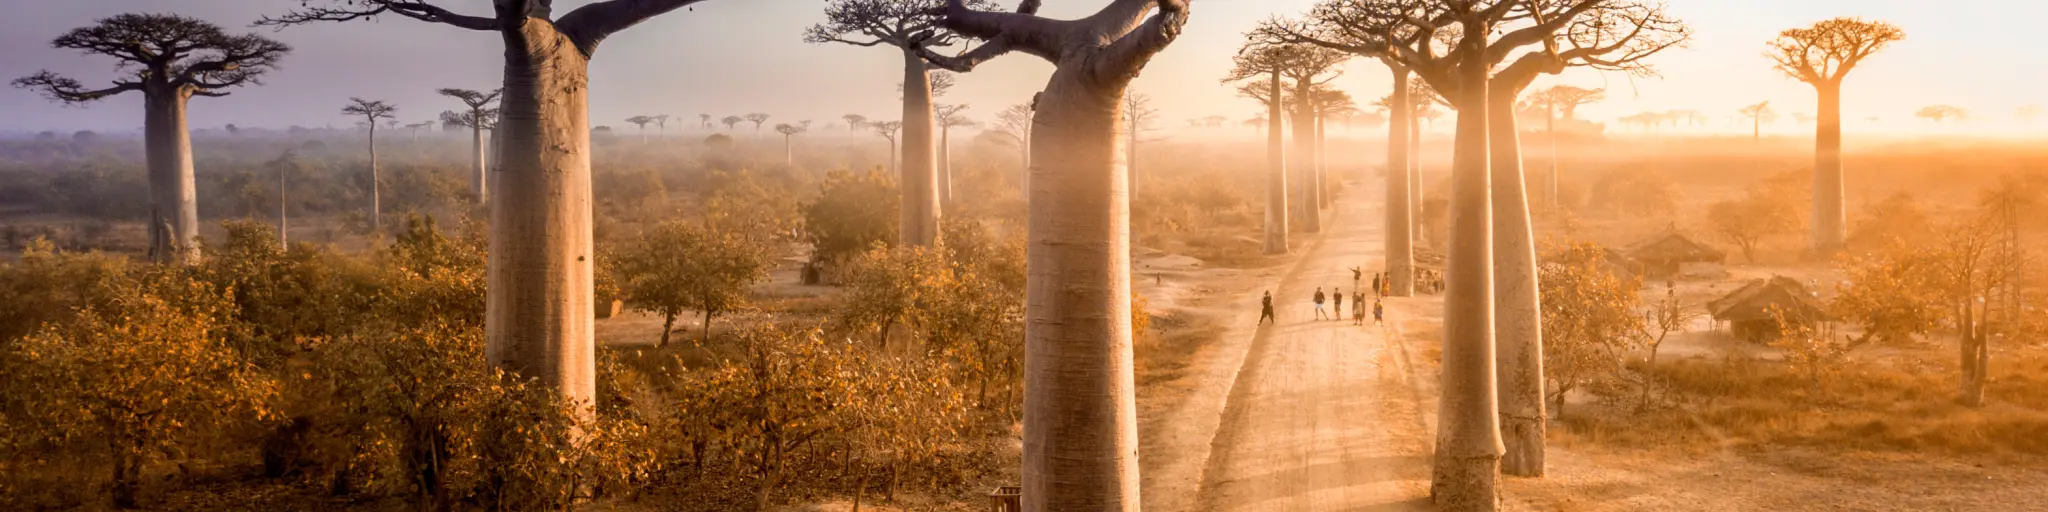 One of the best driving roads in the world - the avenue of of the baobabs